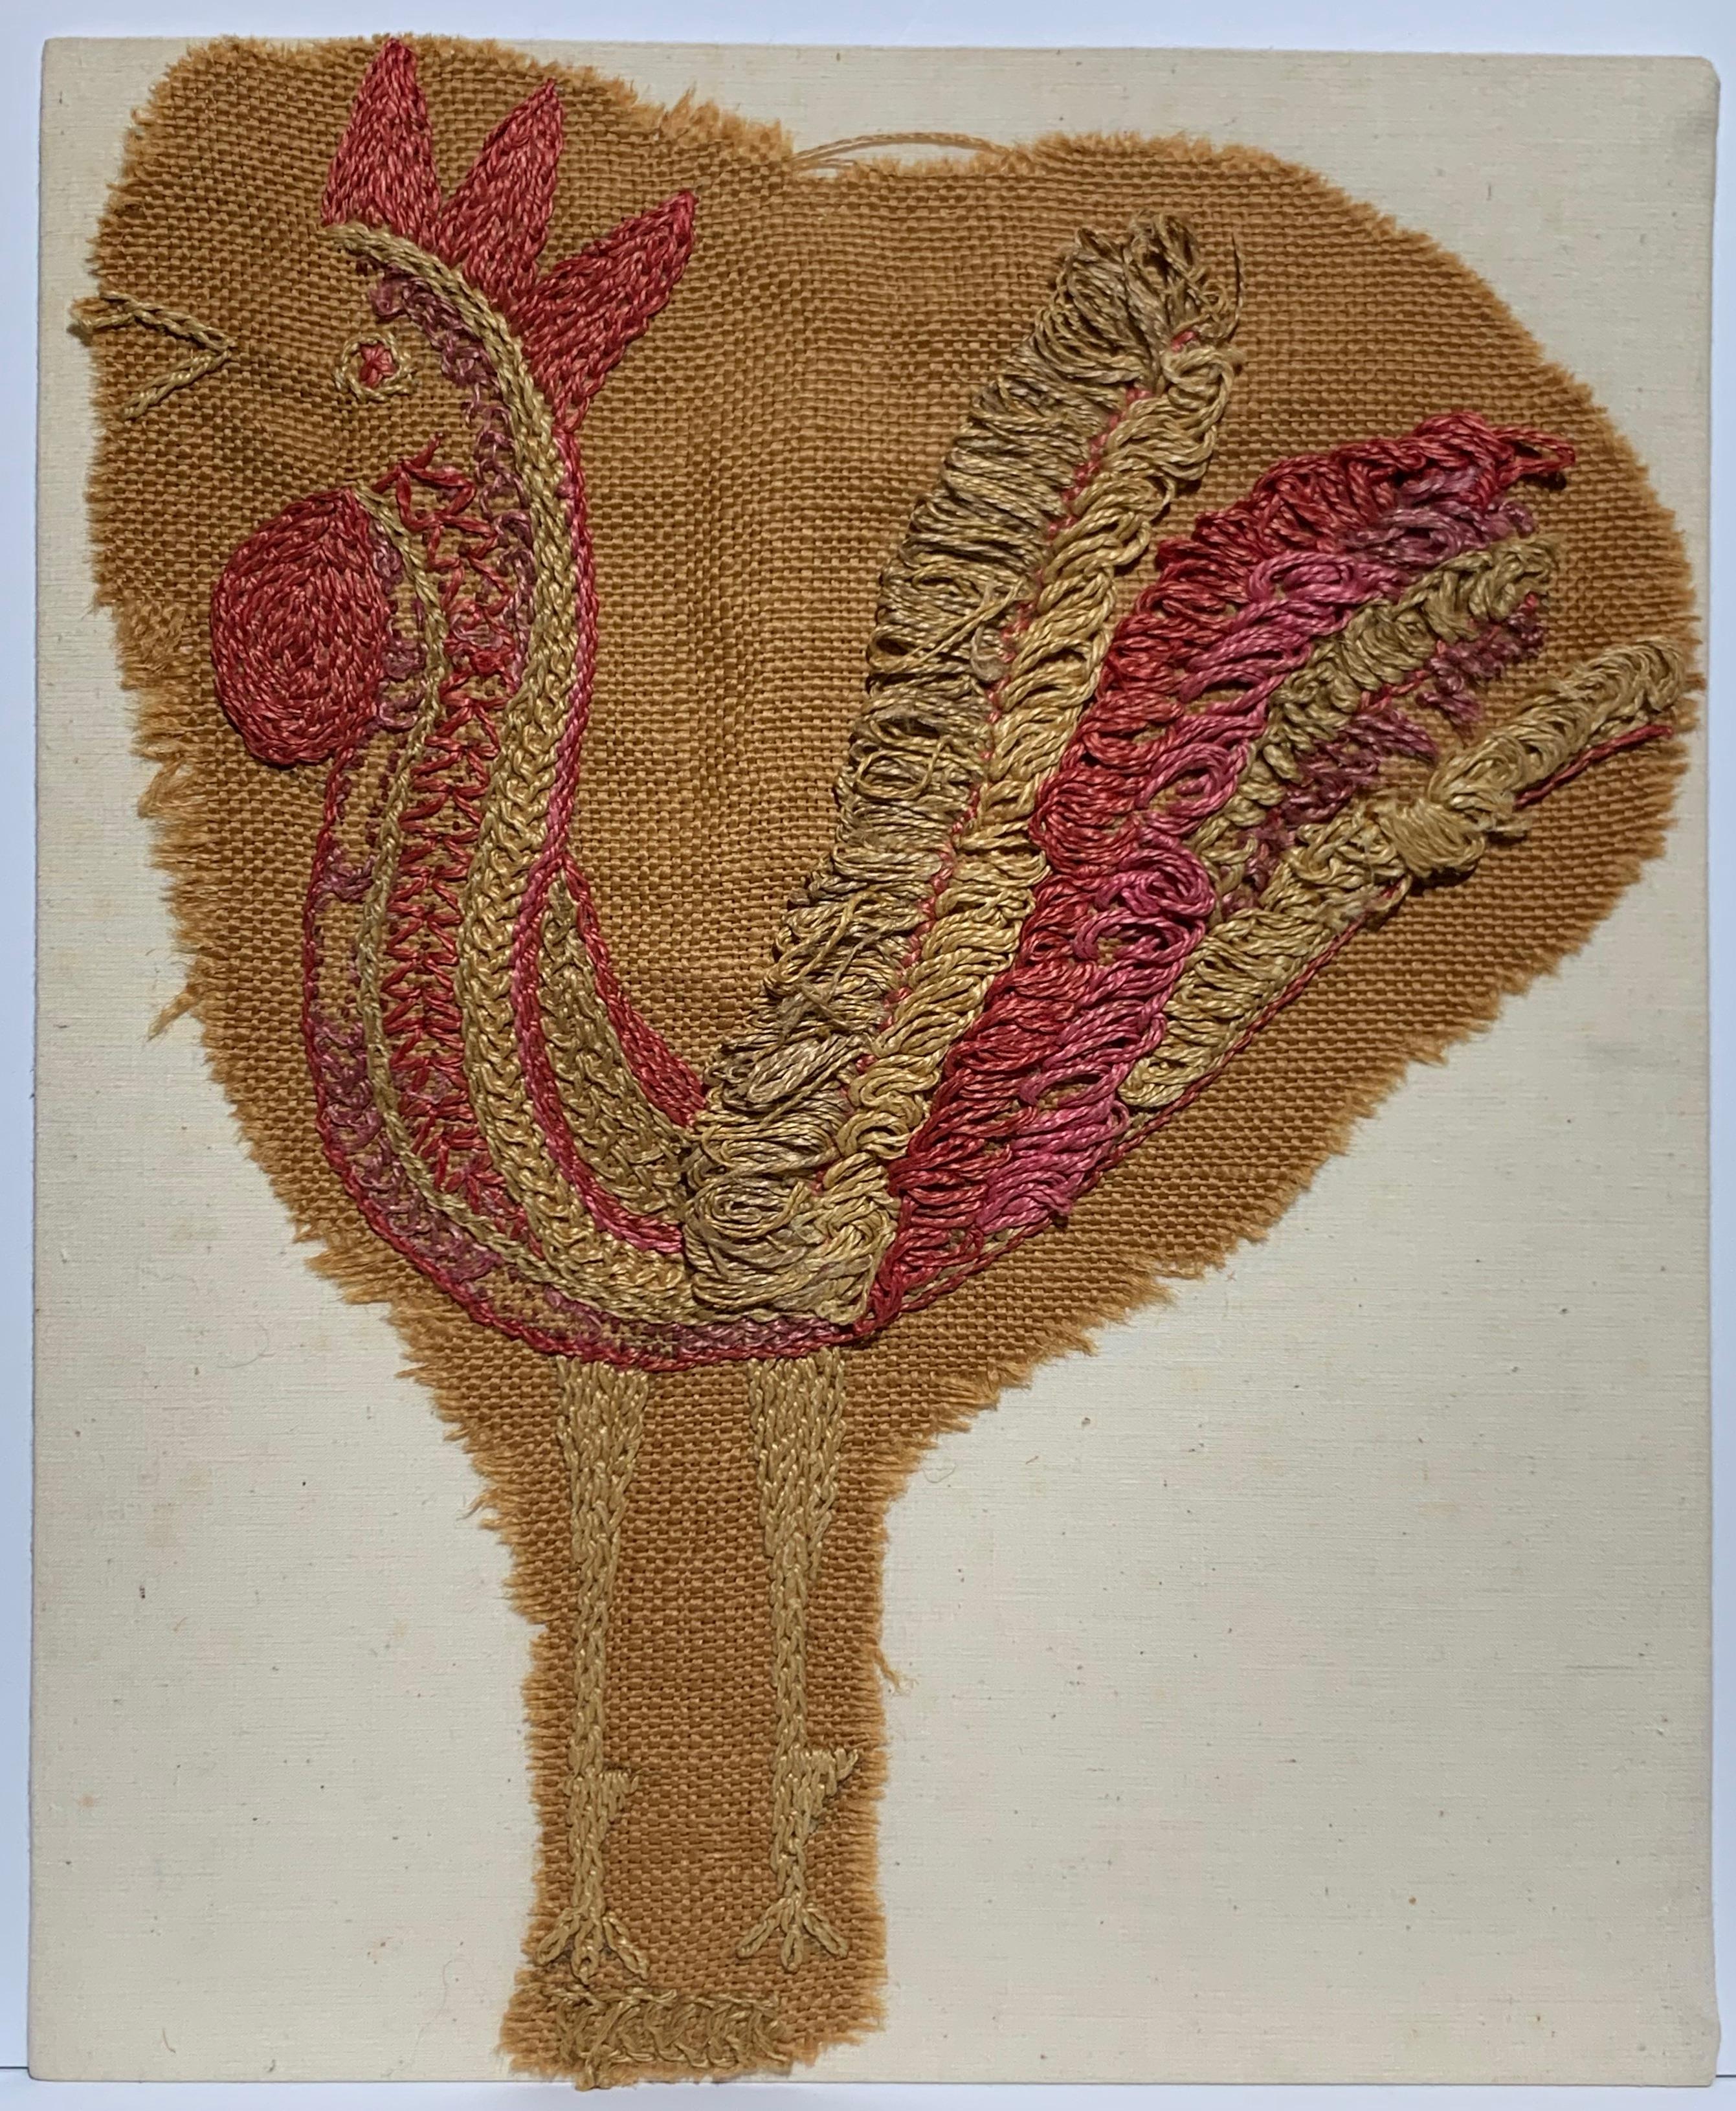 Rooster ( Mexico embroidery fabric art) - Mixed Media Art by Eve Peri